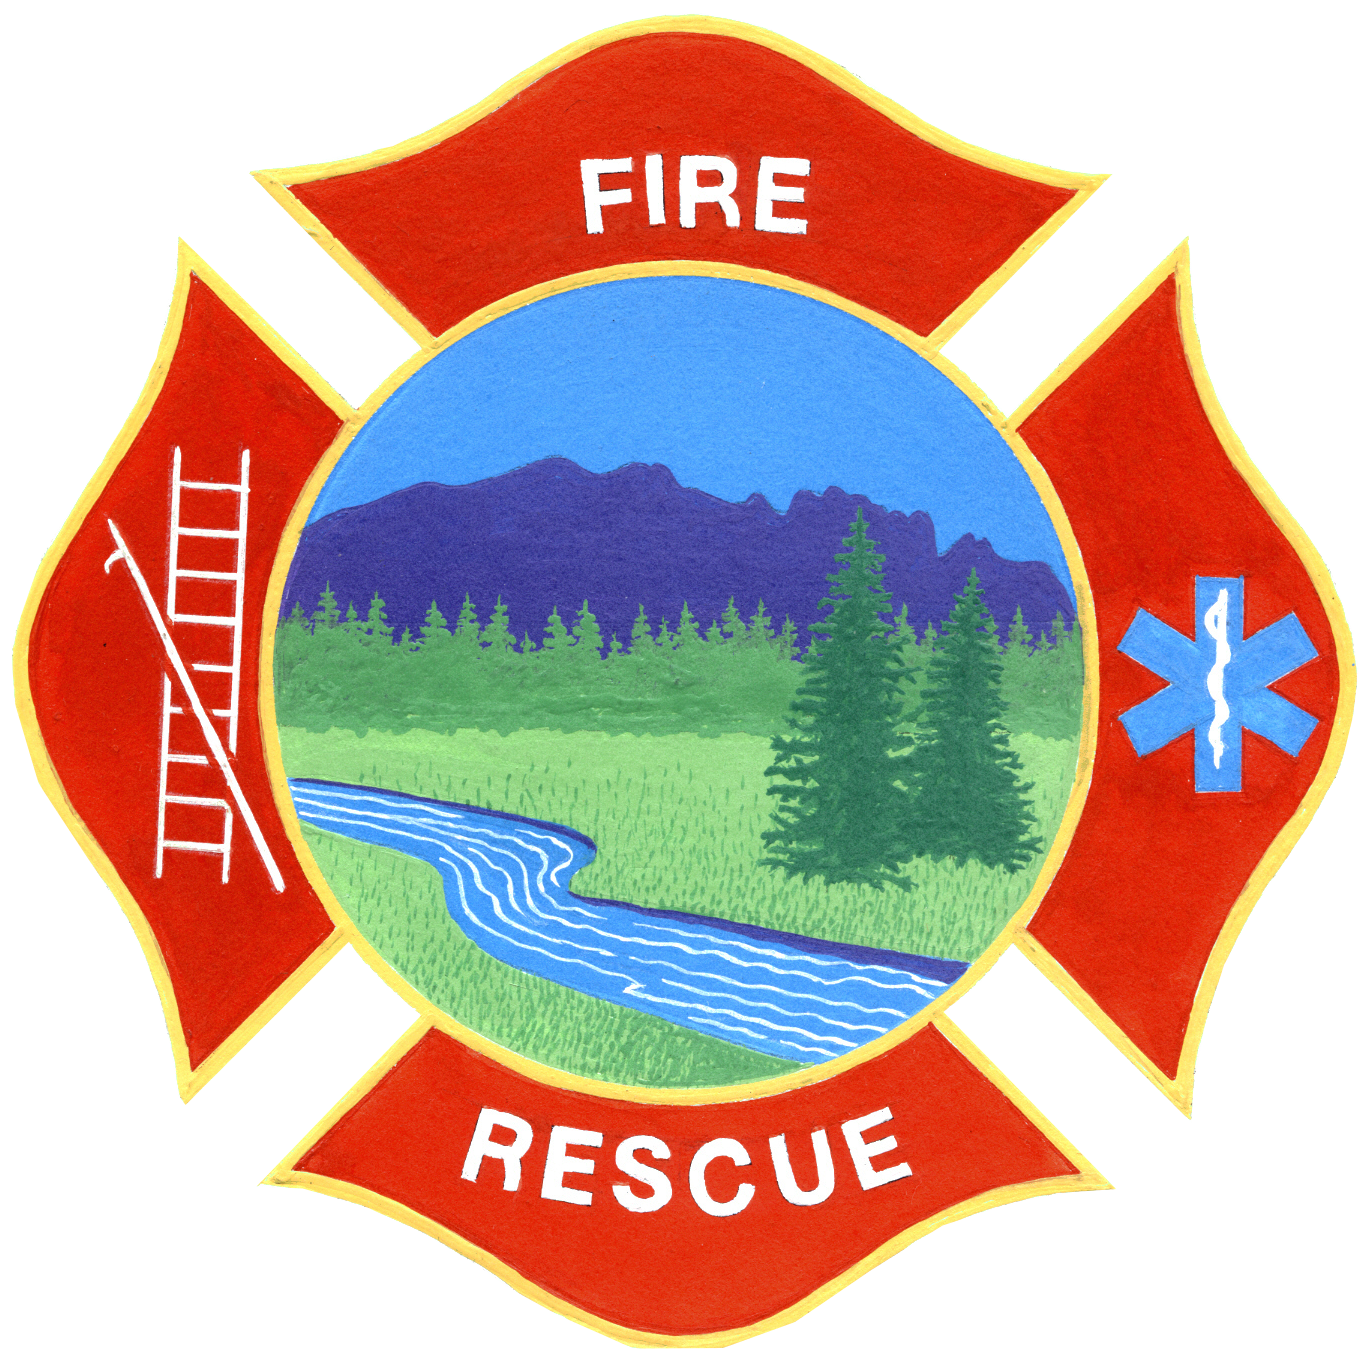 North Fork Fire Protection District